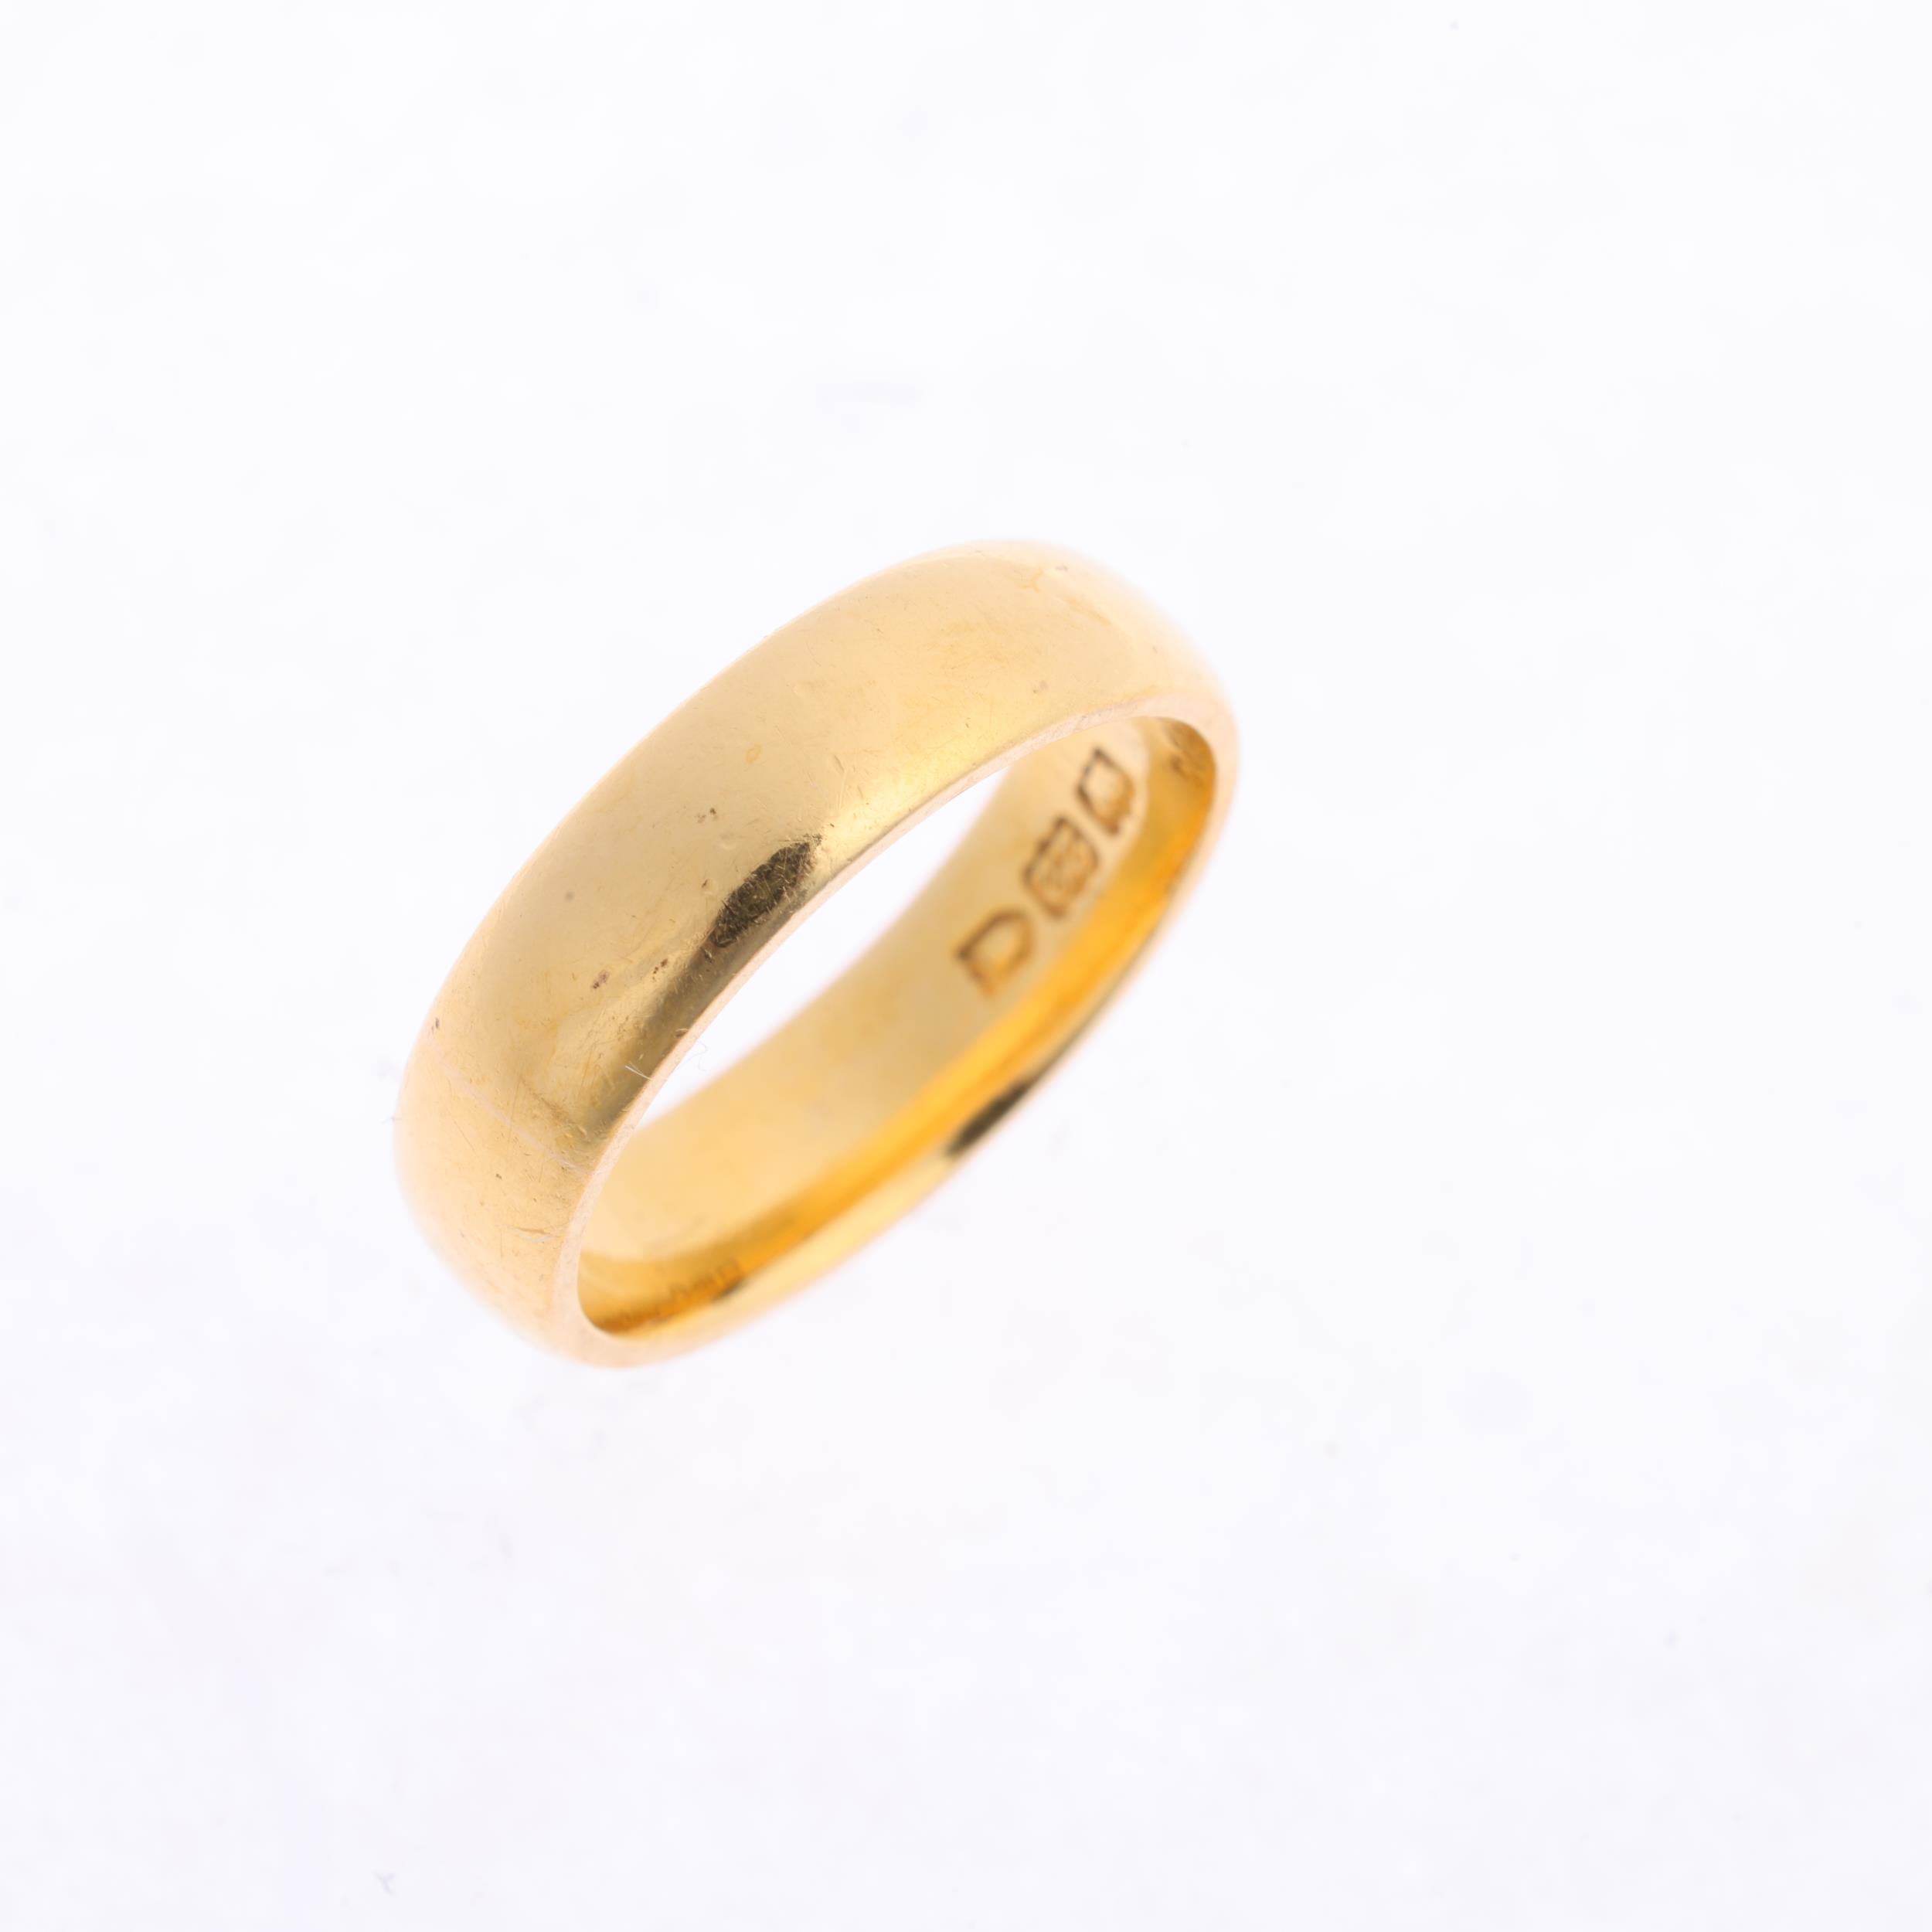 A 22ct gold wedding band ring, no London date letter, band width 5.1mm, size L, 6.6g Condition - Image 2 of 4